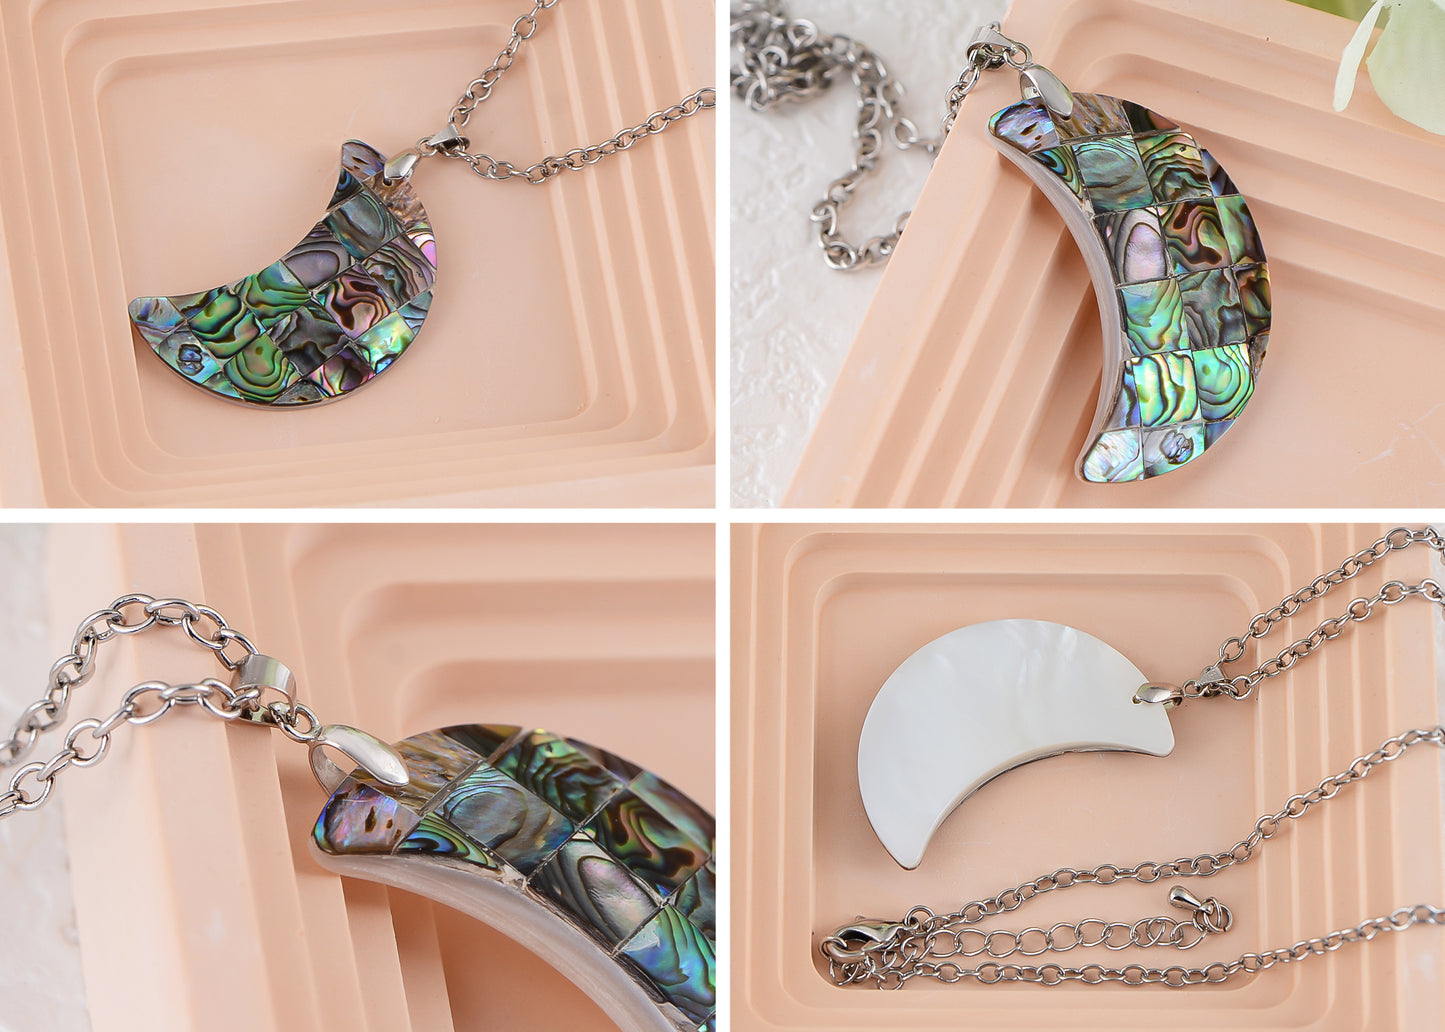 Alilang Crescent Moon Pendant Necklace Natural Abalone Shell Necklaces Jewelry for Women